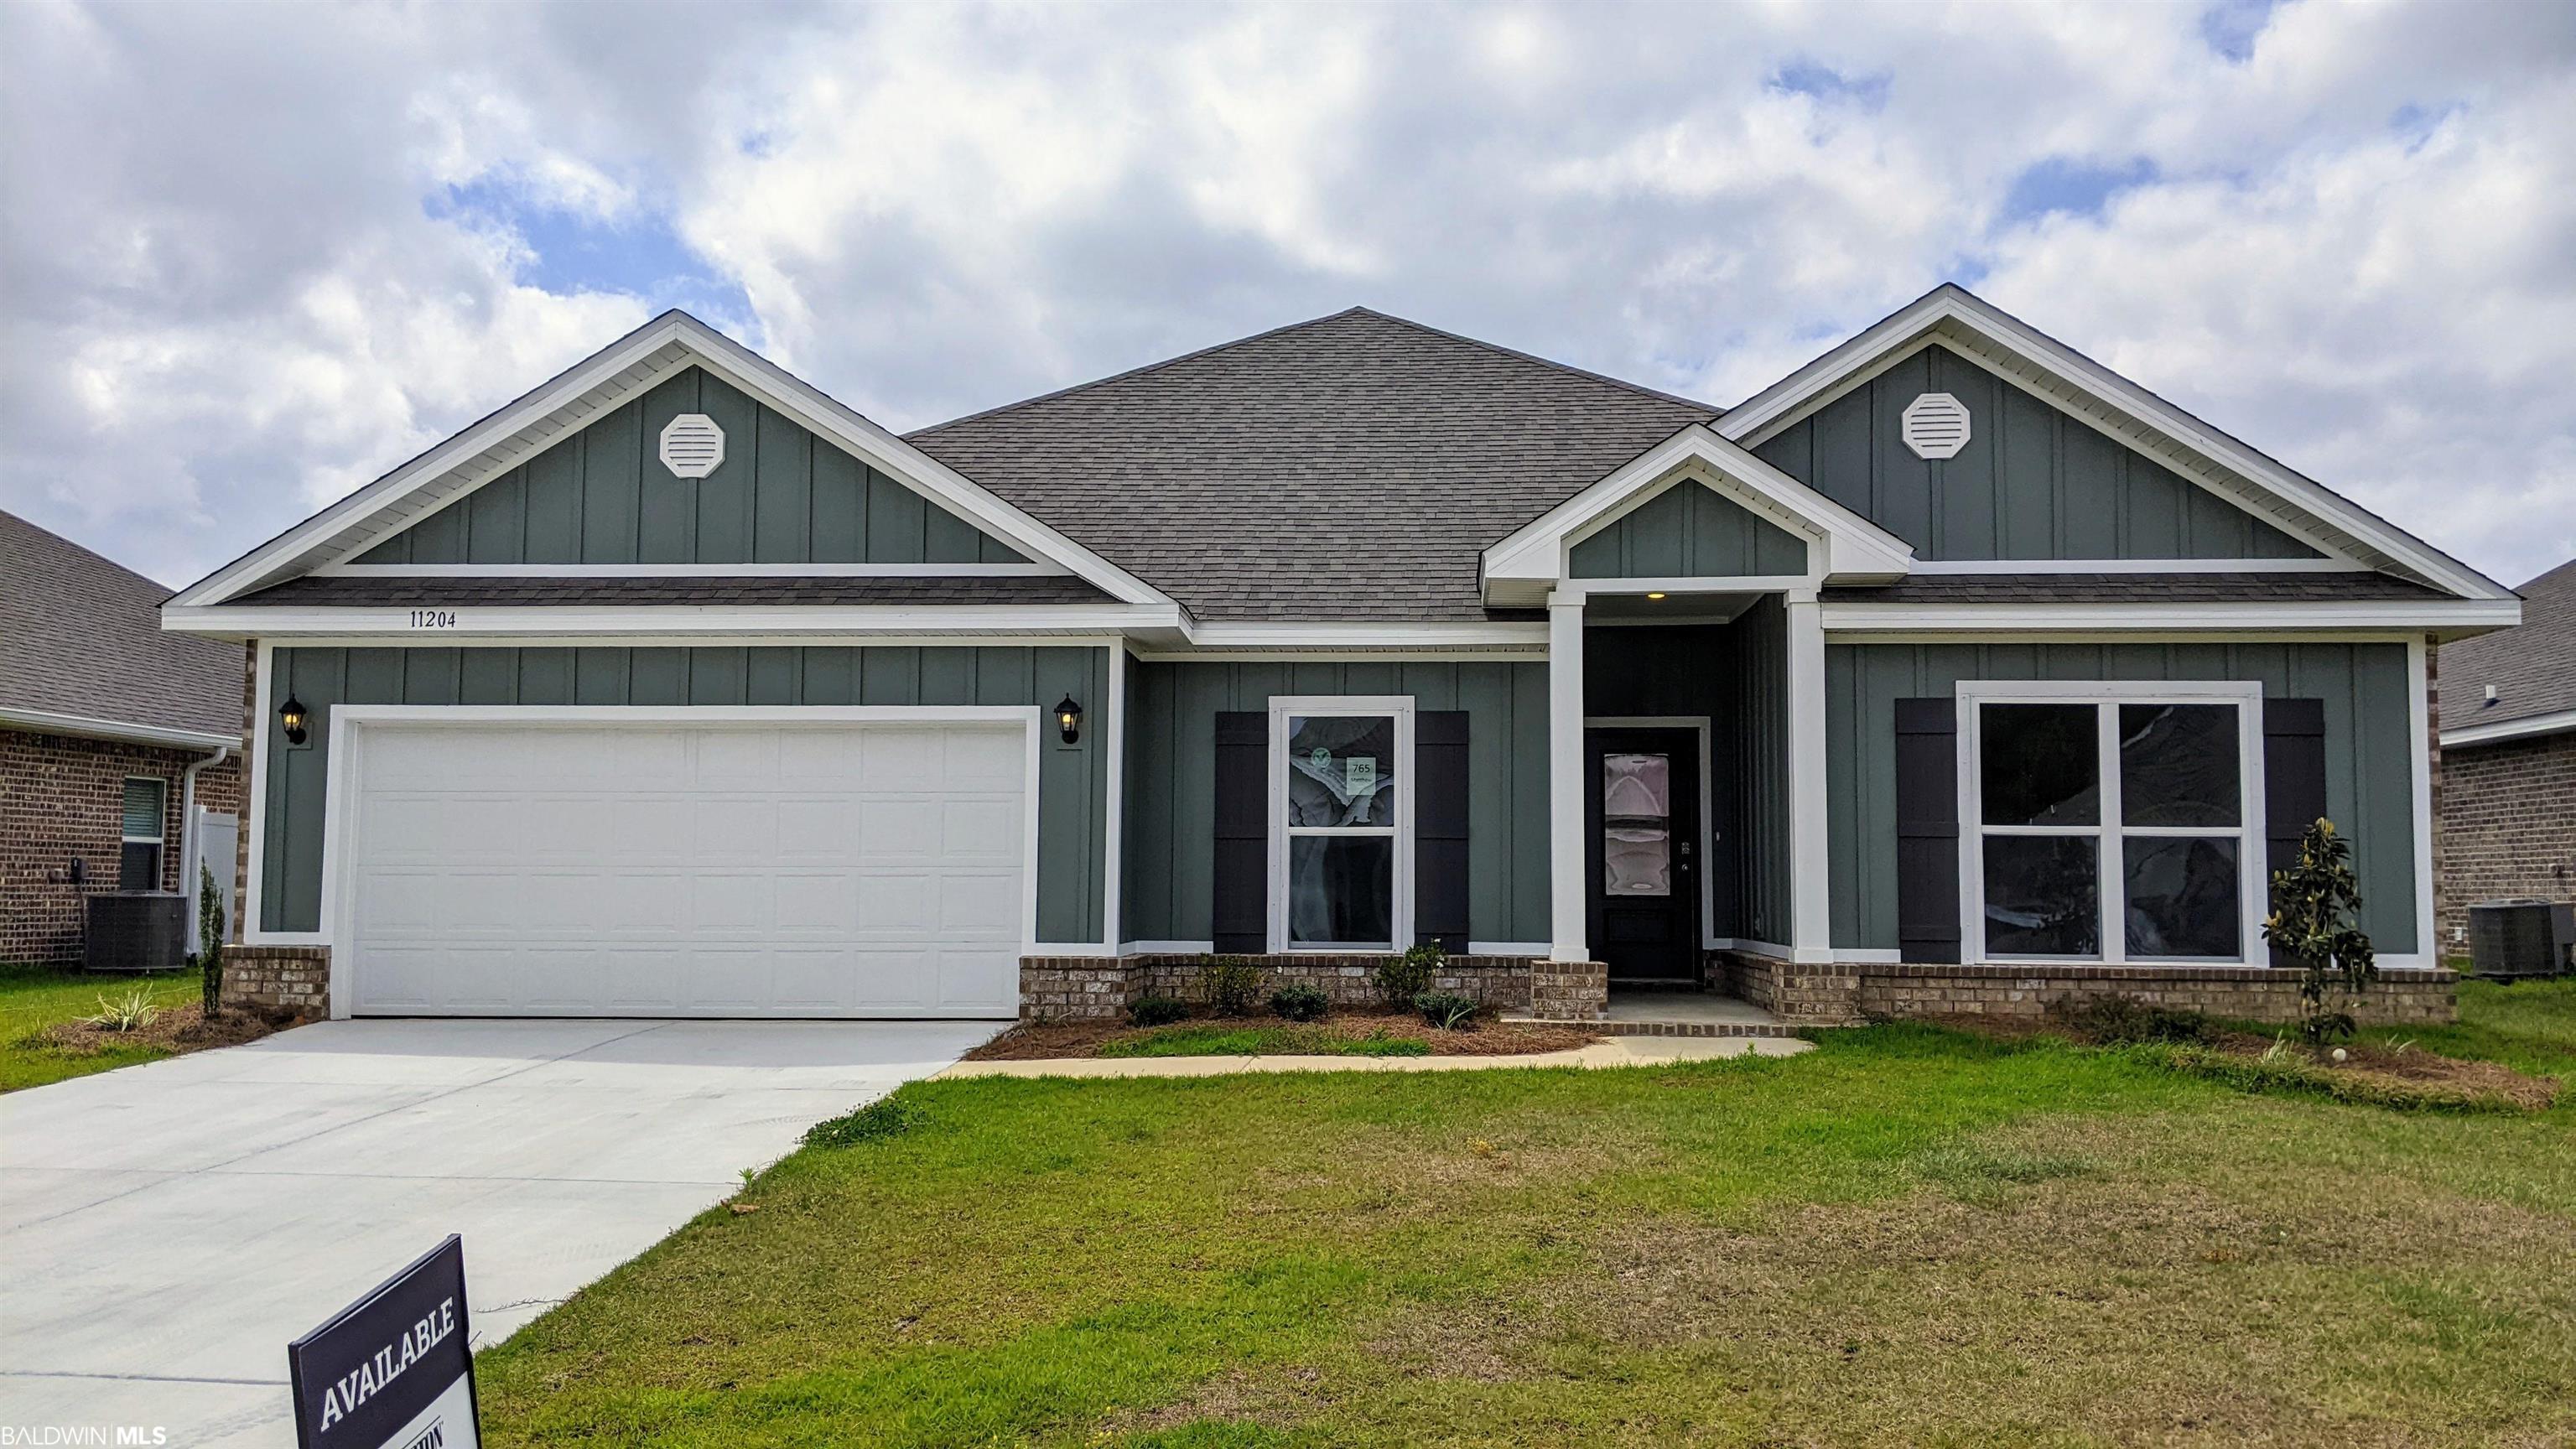 **Up to $10,000 in incentives for an April closing!! "Use It Your Way" can be used toward blinds, a refrigerator, washer, dryer, gutters, DEAKO lighting package, backsplash, and/or closing costs using our preferred lender.** Check out the MATTHEW PLAN in Jubilee Farms! The Matthew is a new floor plan which features a flex room/5th bedroom AND TWO FAMILY ROOMS. Perfect for entertaining. The second family room includes a wet bar and undercounter refrigerator and is great for game days! Upgraded designer painted cabinetry, and EVP extended throughout home (no carpet). This home offers a Gold Fortified Home TM certification and be equipped with Smart Home Technology. It also includes a one-year builder's warranty and 10-year structural warranty.   Below market rates when using our preferred lender, DHI Mortgage (an affiliated business) could give you significant more buying power.  Jubilee Farms is situated on more than 350 acres of rich Baldwin County farmland. The neighborhood inspires a lifestyle where family, community and the great outdoors come together. Jubilee Farms offers a picturesque environment to create lifetime memories and enjoy 5-star amenities for buyers at every stage in life. With a resort-style neighborhood pool, spacious clubhouse, and gorgeous walking trails, this real estate in Daphne simply cannot be beat. The design and development of the community reflect the natural environments of both lands, water, and its farming past. Lush green space, towering pecan trees, and beautiful scenic lakes create a serene environment that respects the past while embracing the vision for a bright new future.